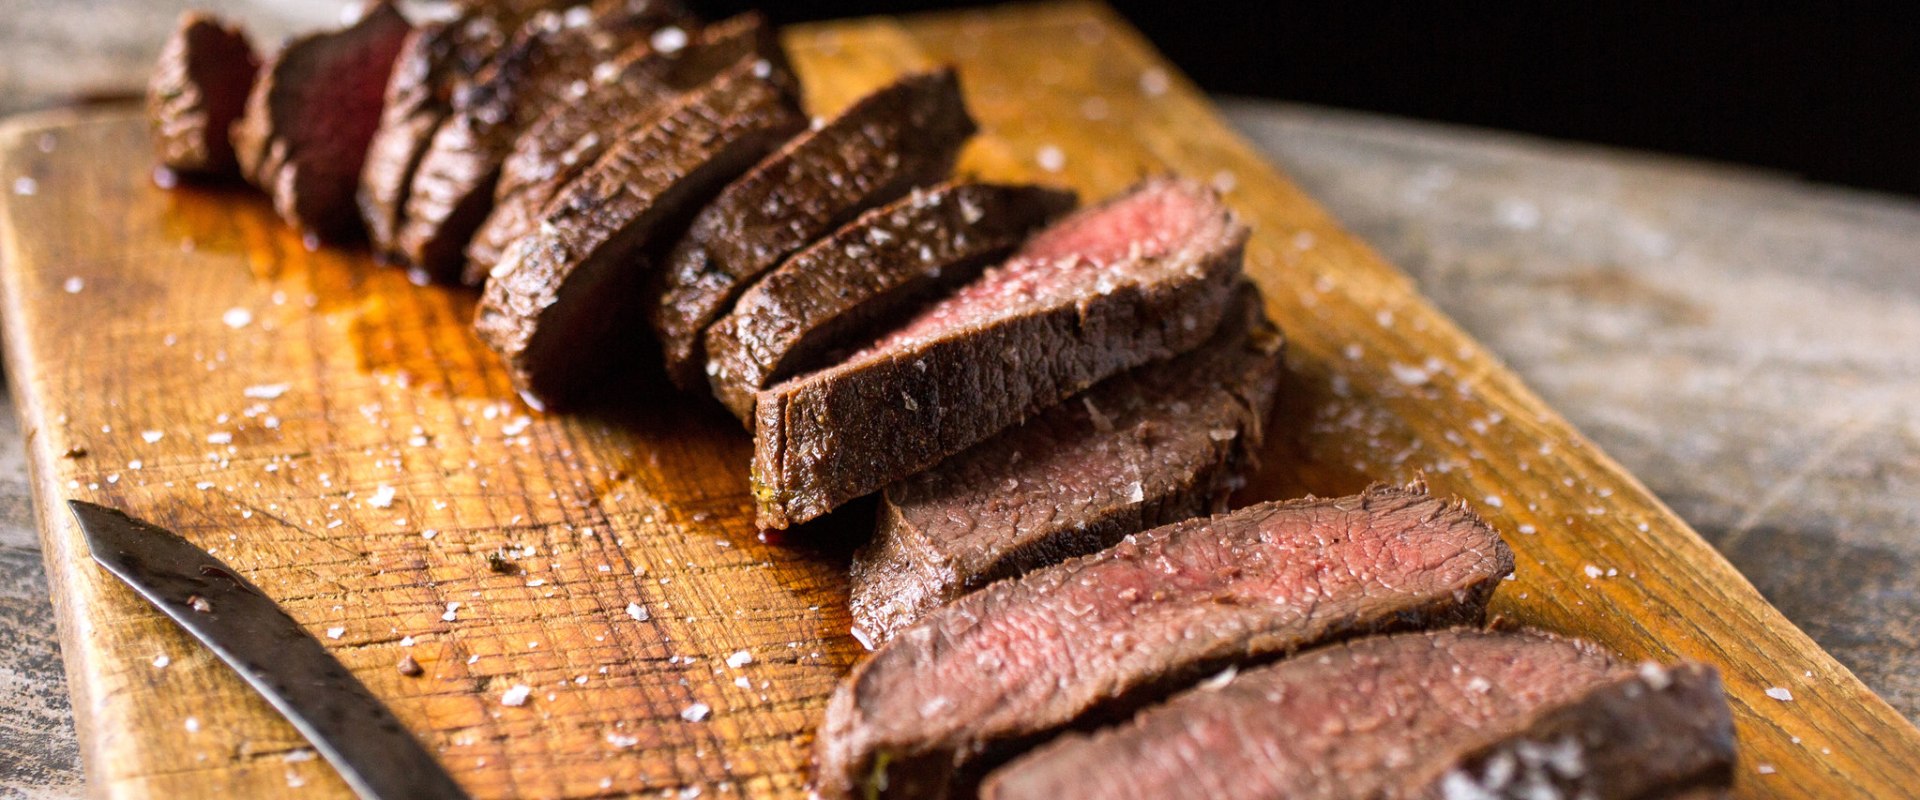 Should venison be cooked rare?